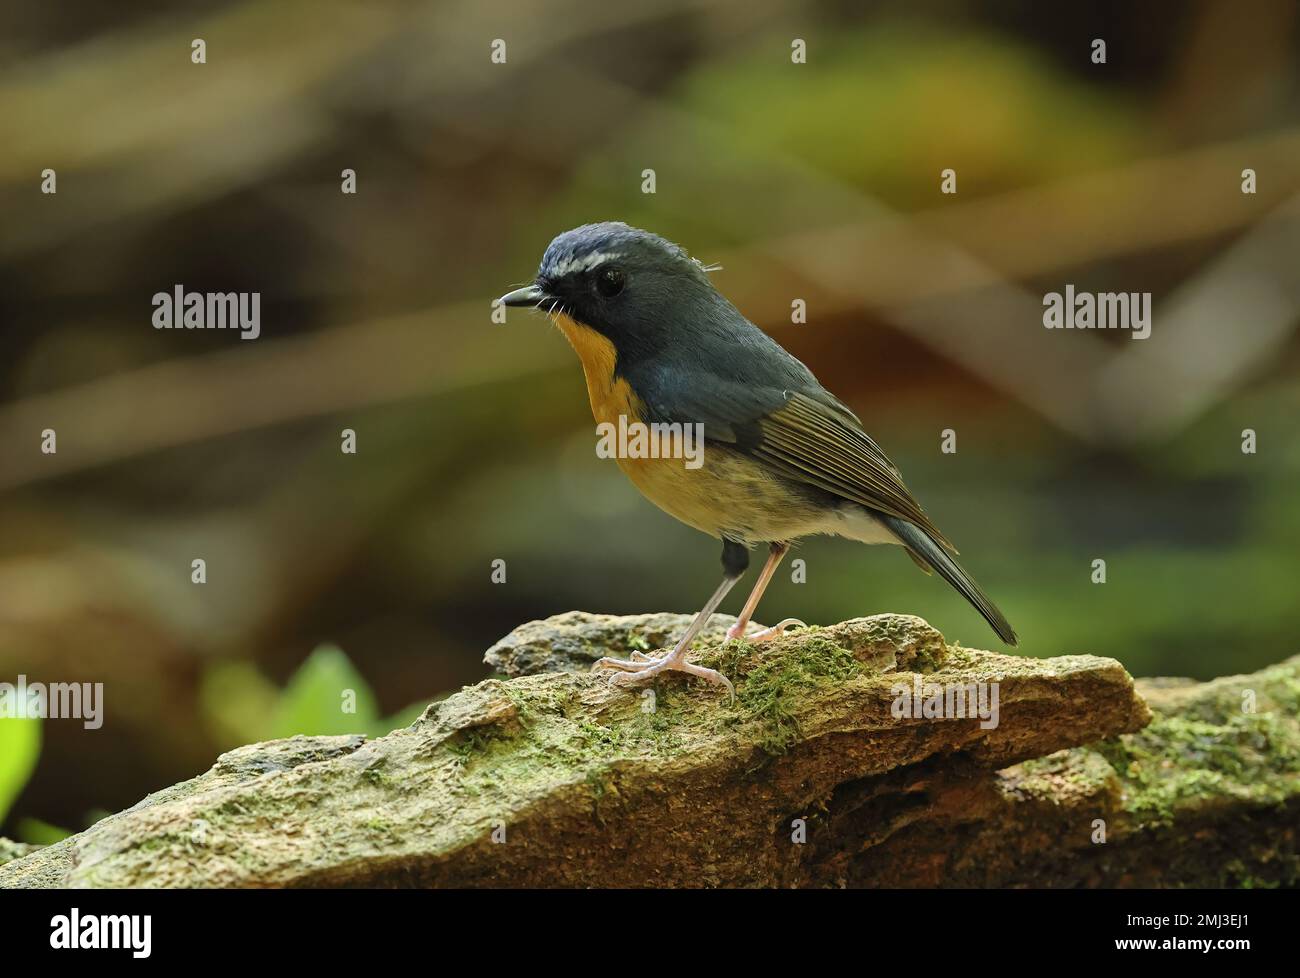 Snowy-browed Flycatcher (Ficedula hyperythra annamensis) adult male perched on mossy log  Da Lat, Vietnam.     December Stock Photo